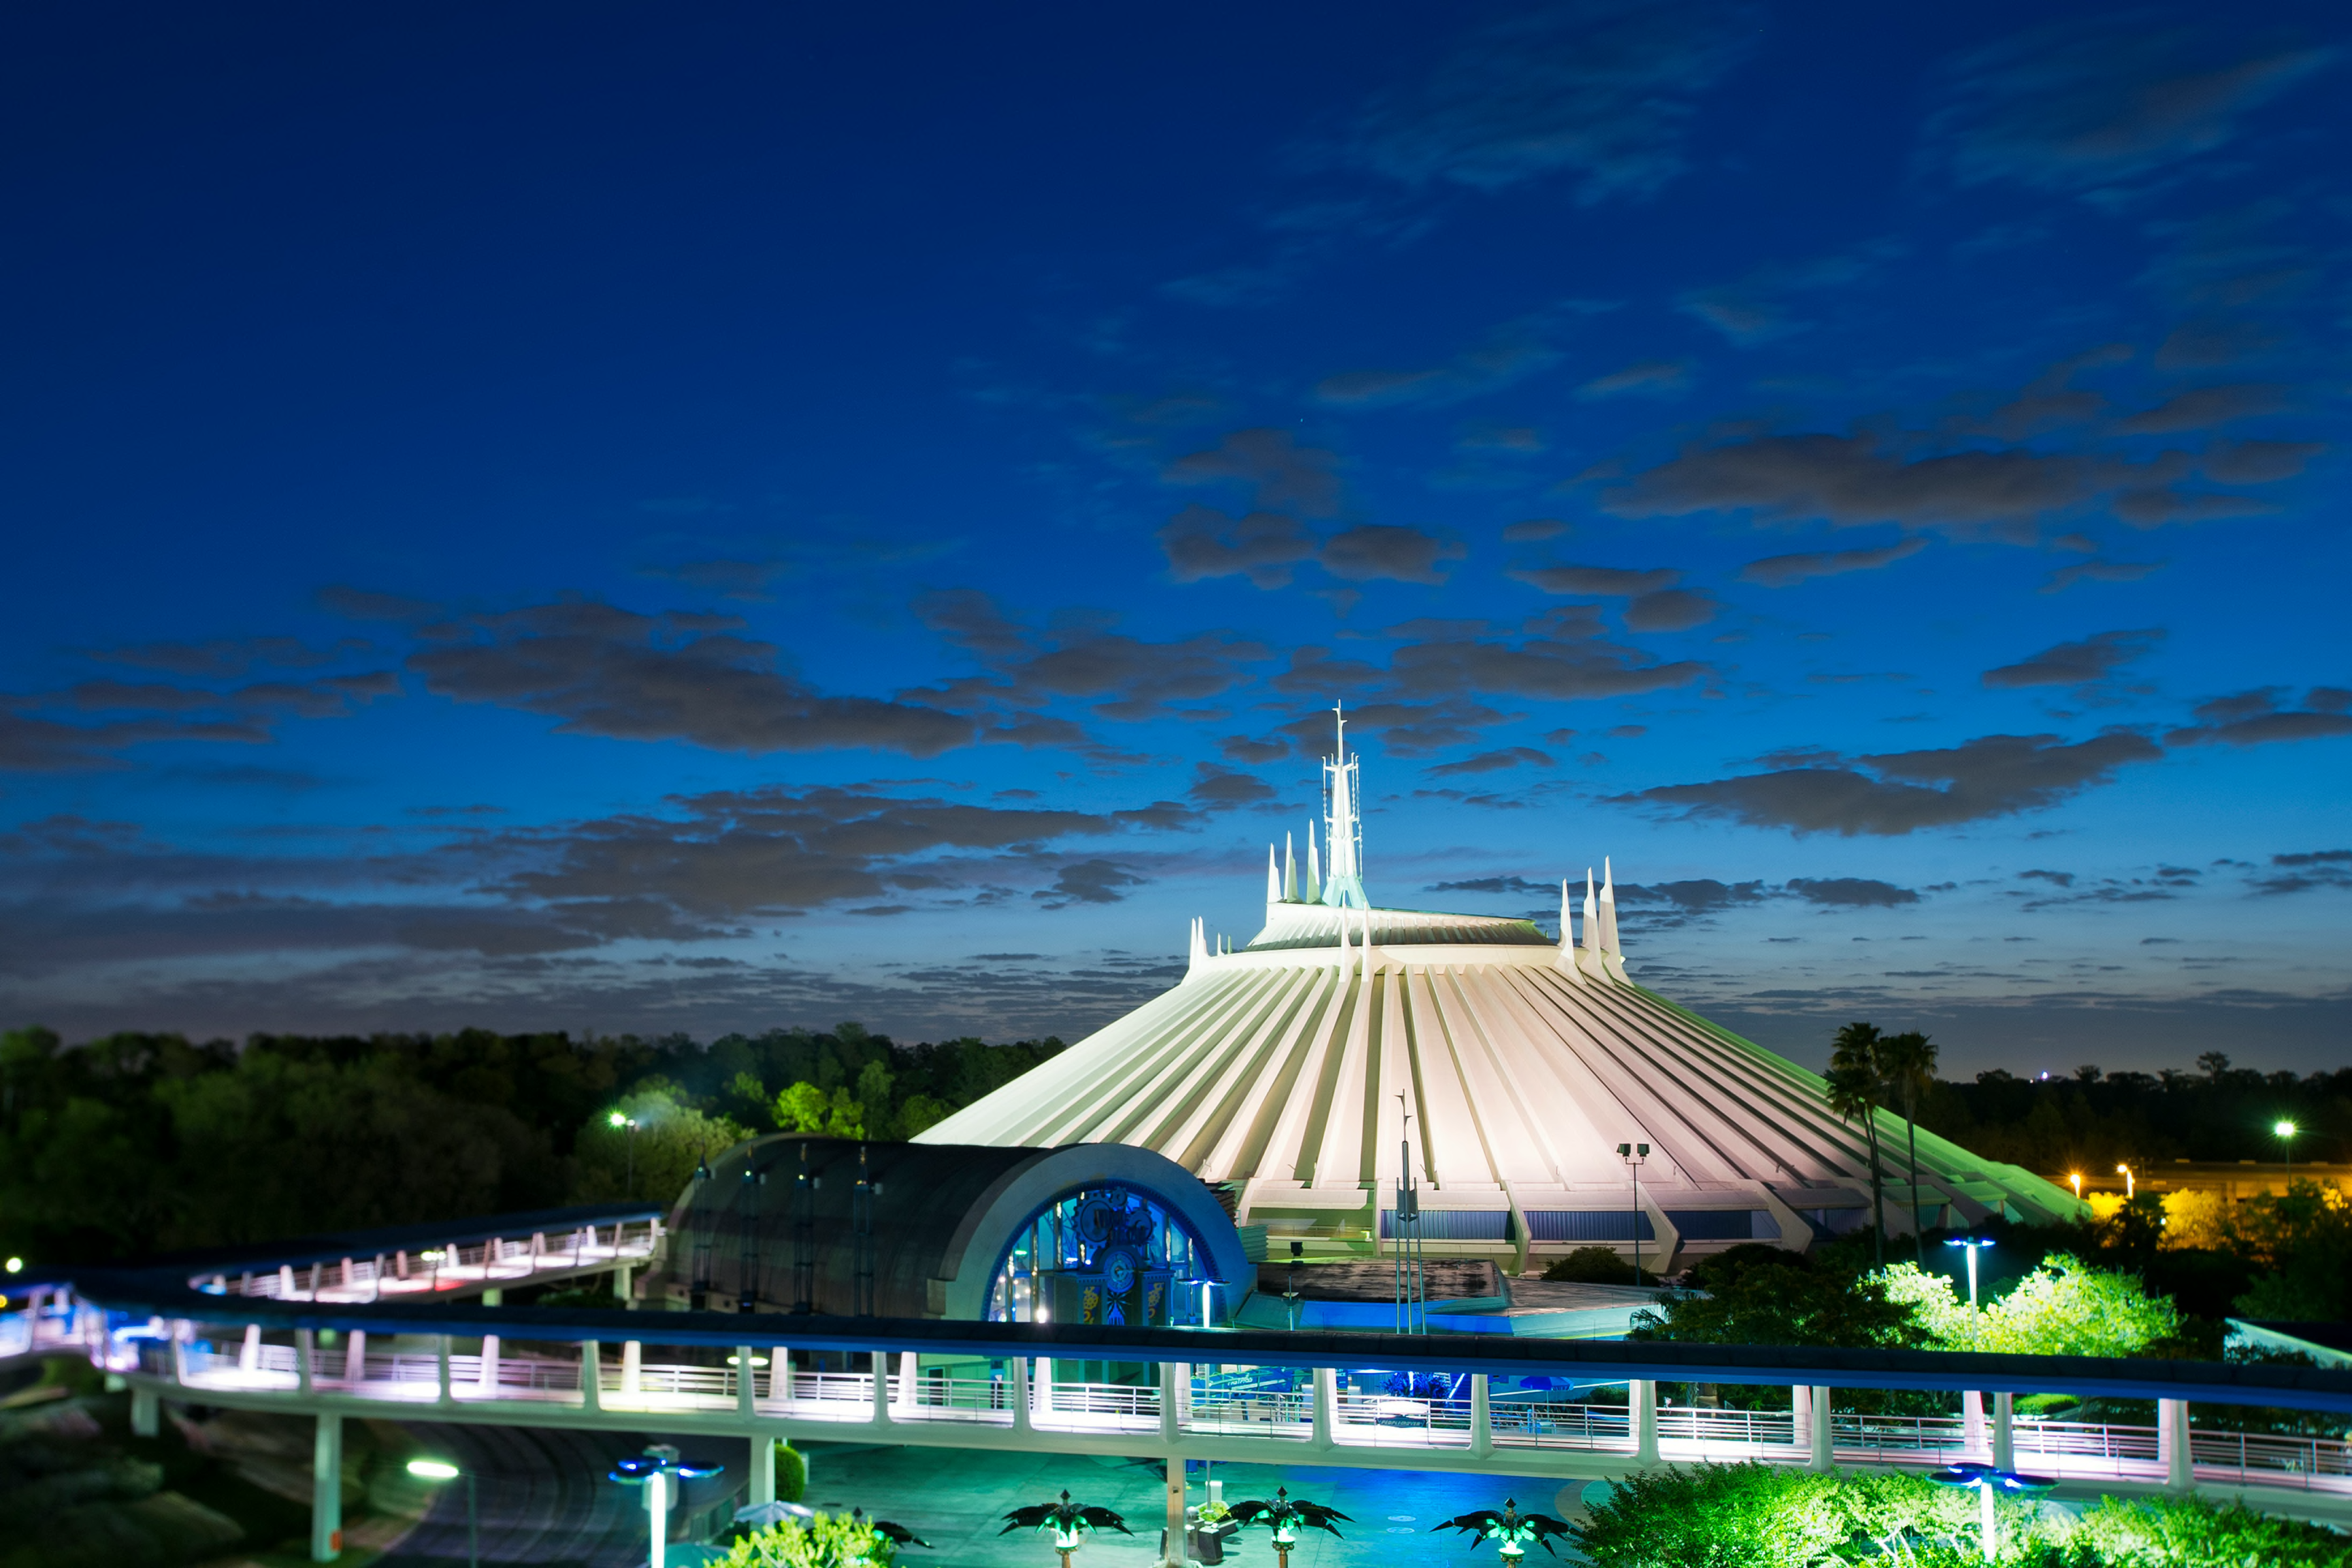 Could Magic Kingdom Tomorrowland's expansion be more than just Tron?